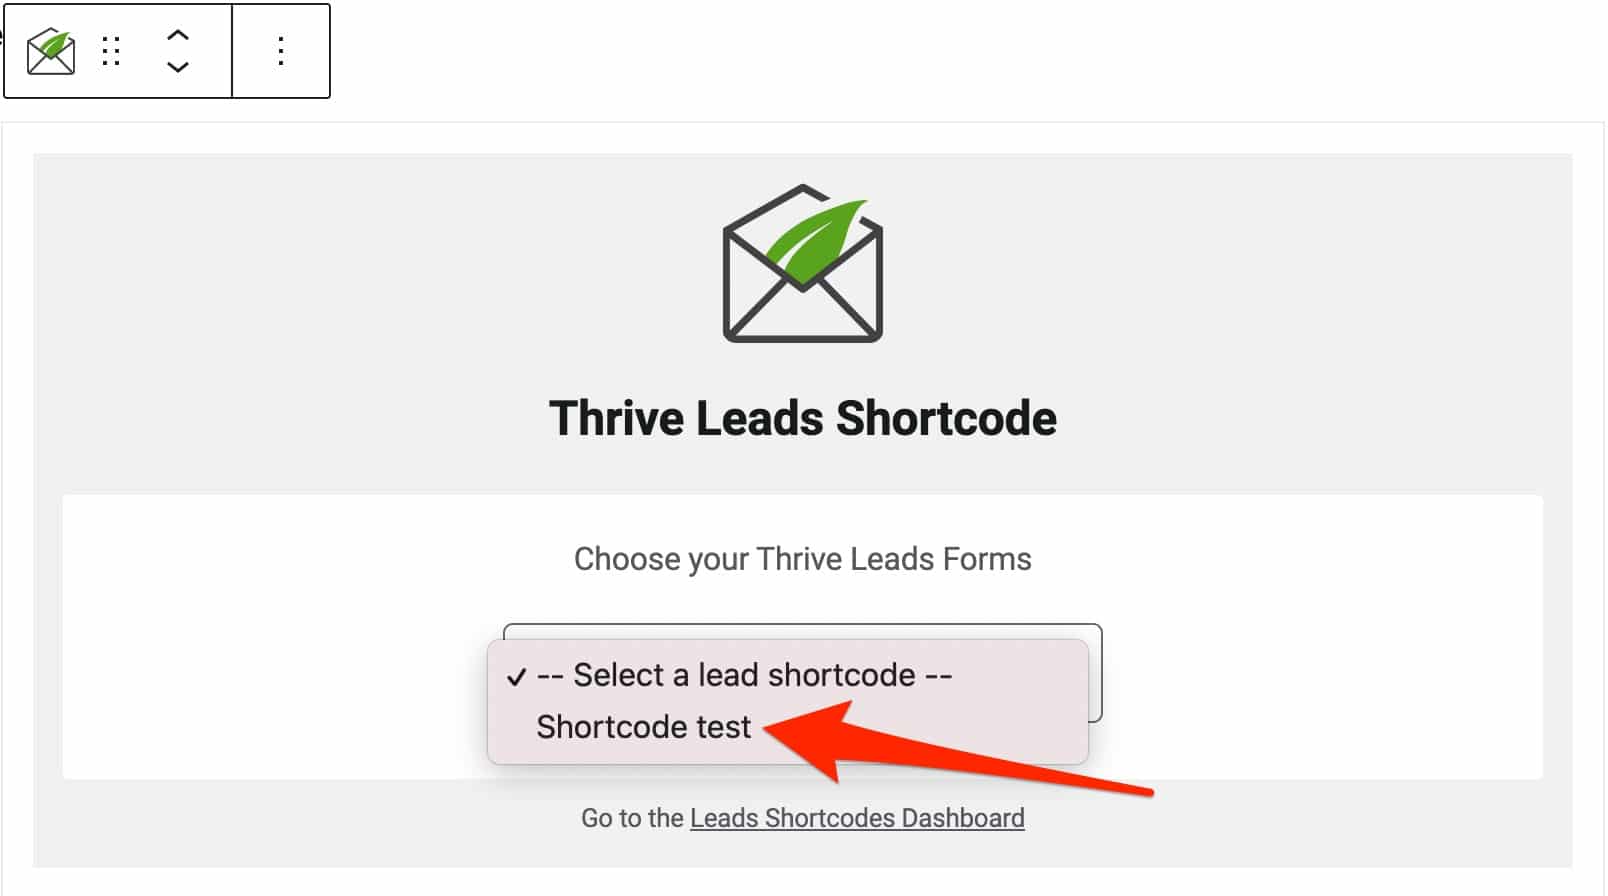 Added Thrive Leads form via shortcode.